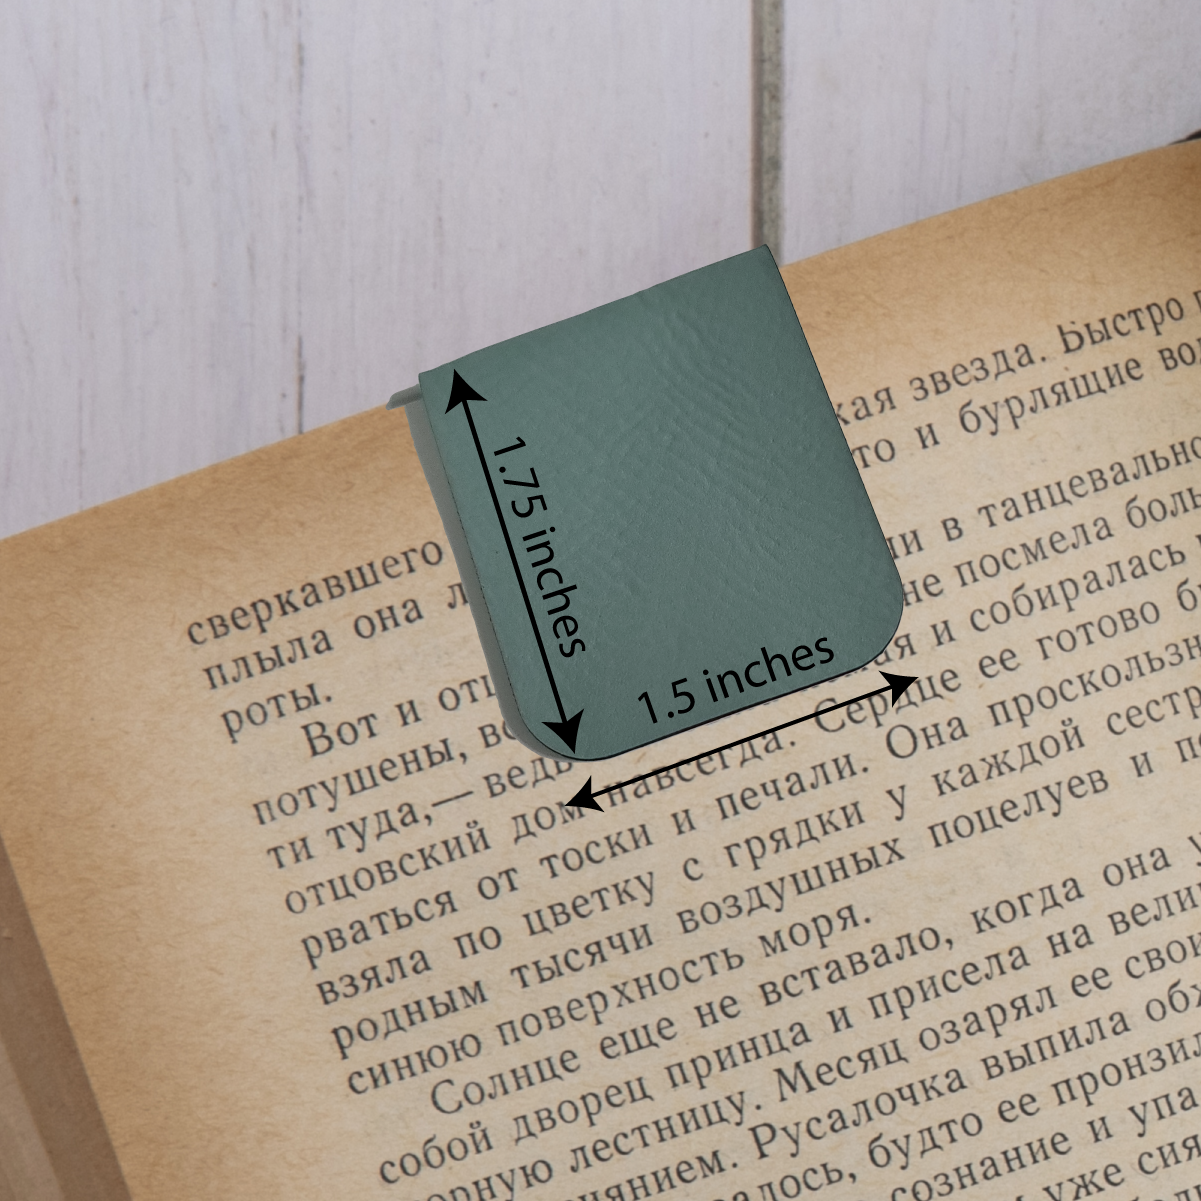 Get Things Done - Magnetic Leatherette Bookmark - Choose your leatherette color!